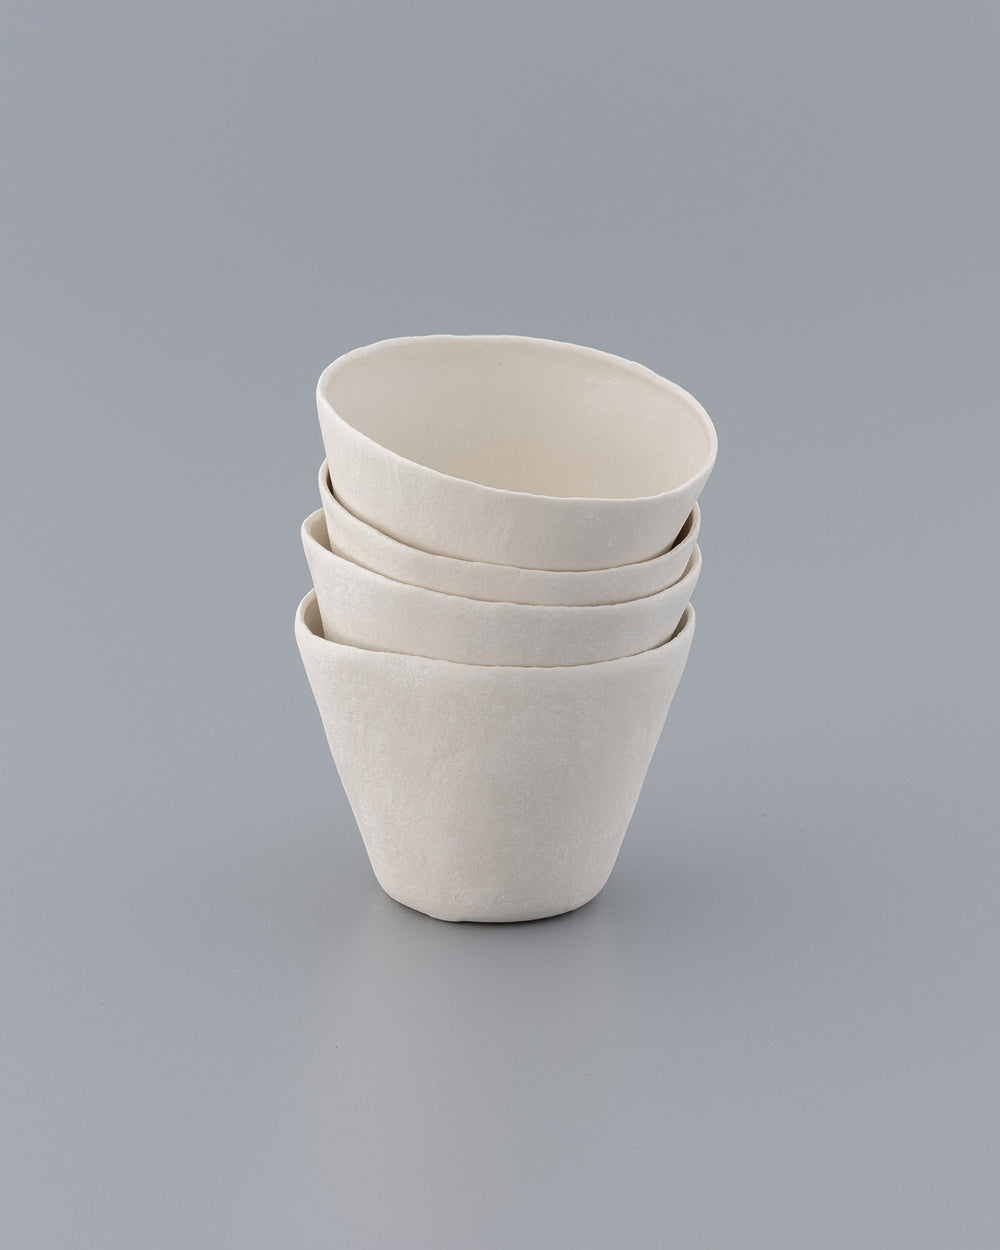 4 cups set White 01